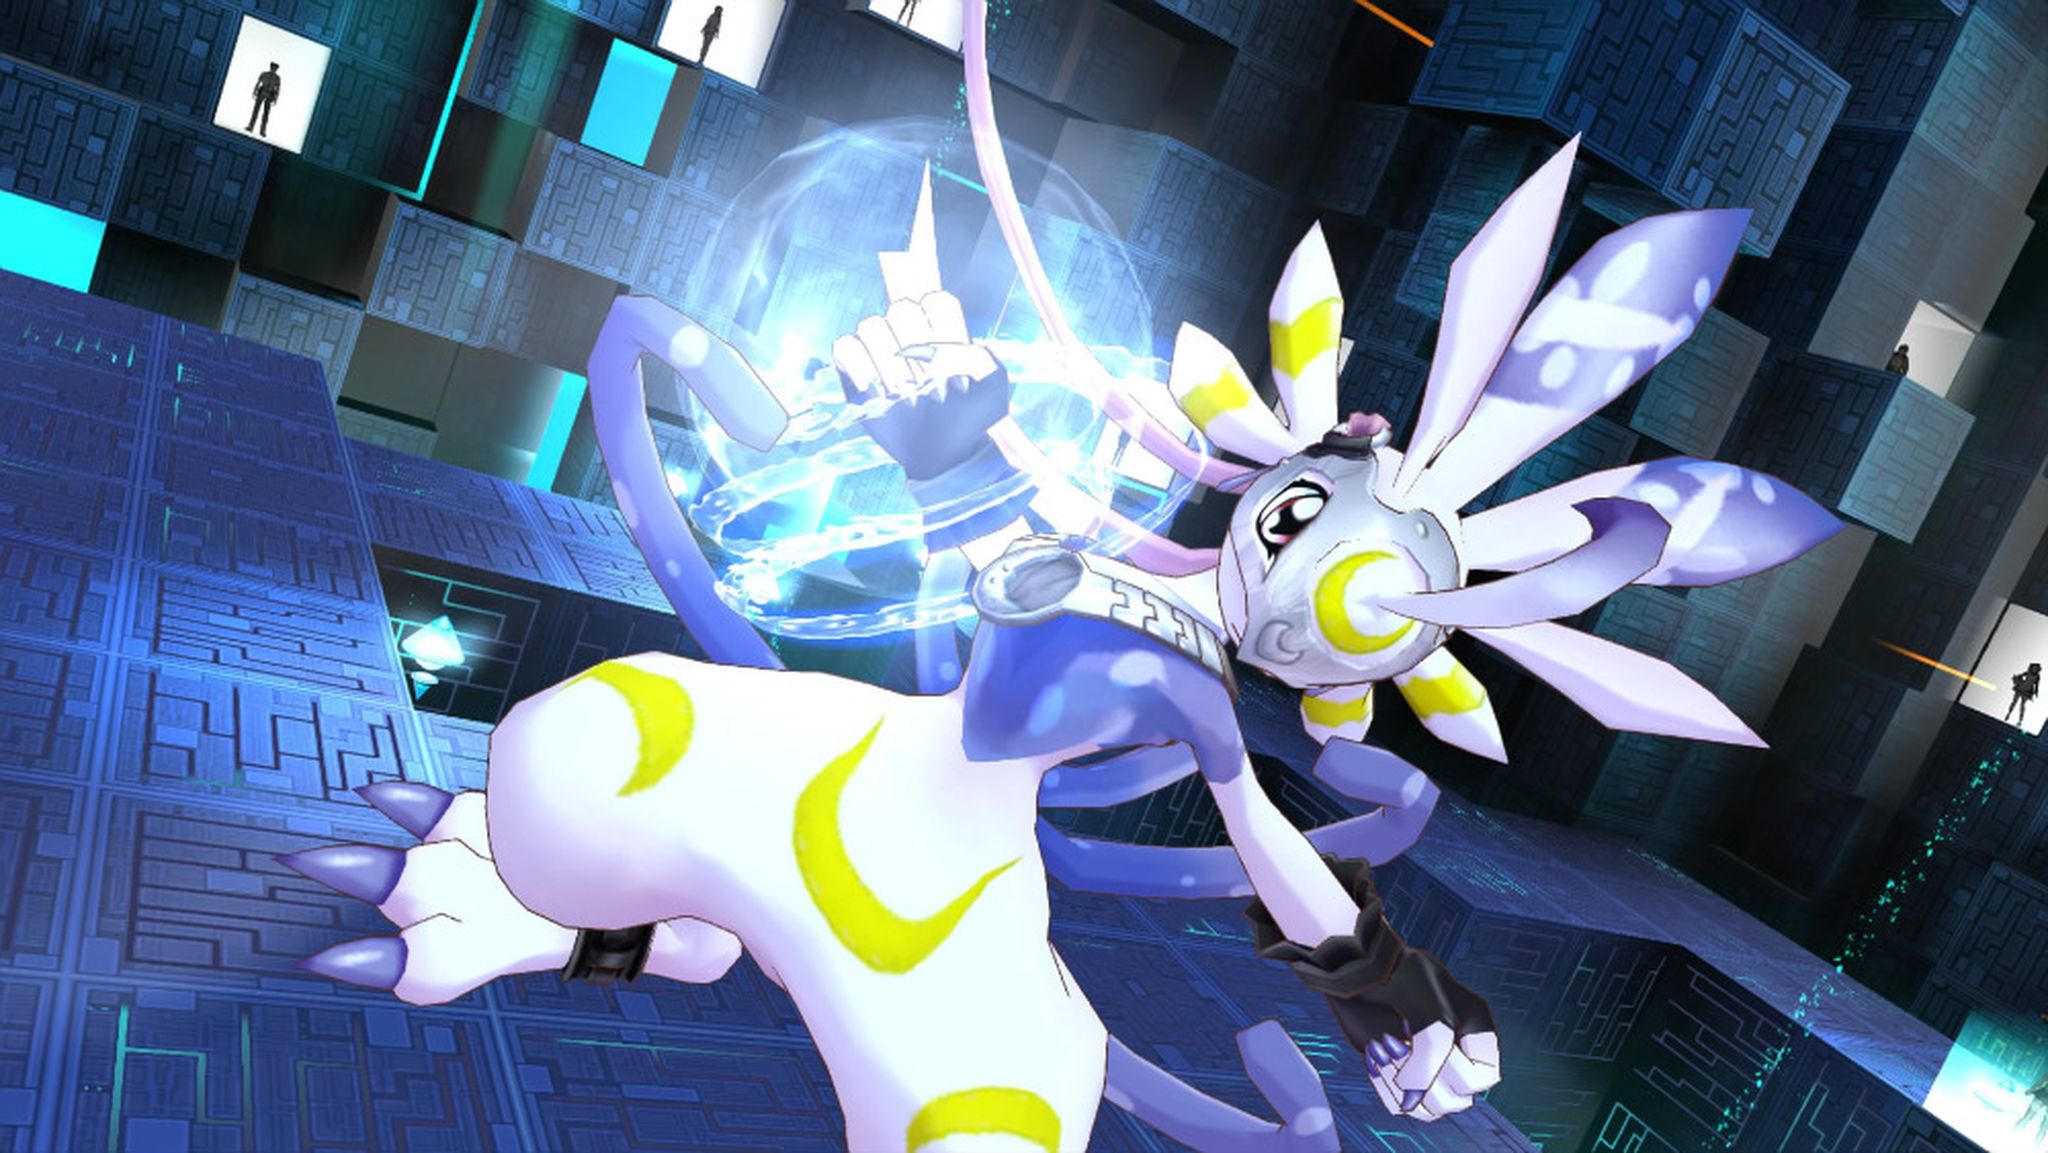 Digimon Story Cyber Sleuth Hacker's Memory